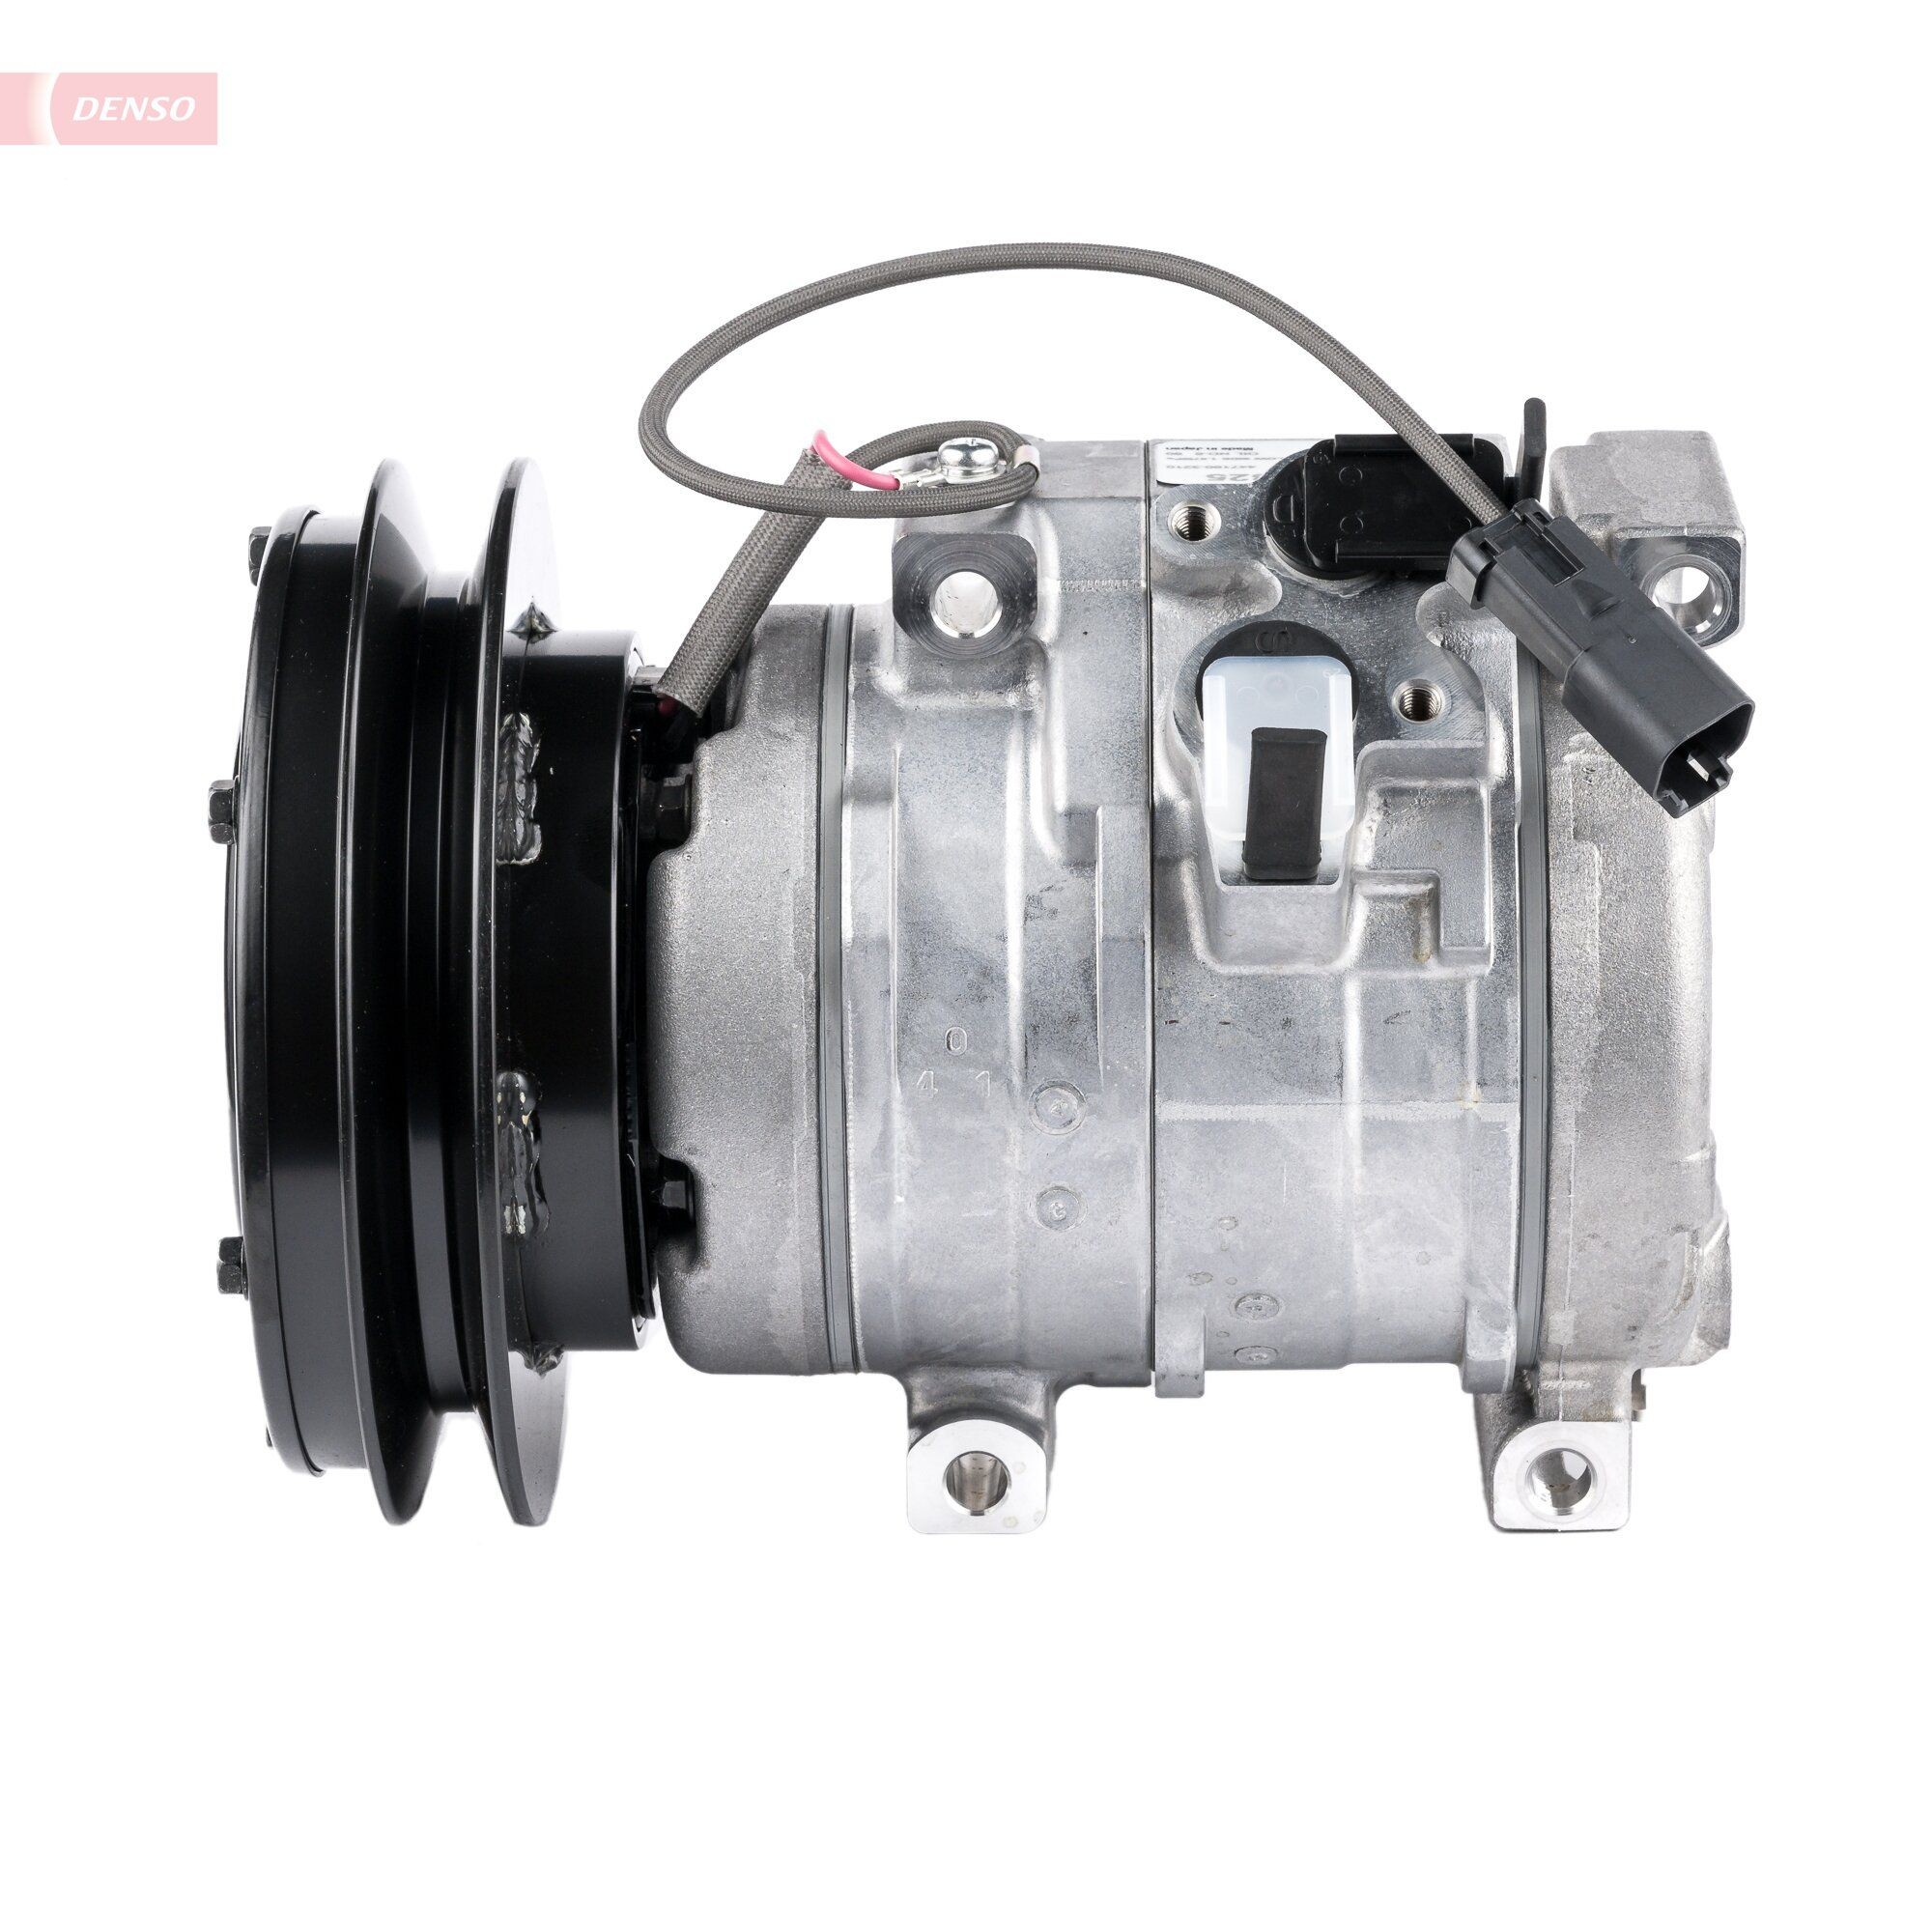 DENSO DCP99825 Air conditioner compressor 10S15C, 24V, PAG 46, R 134a, with magnetic clutch